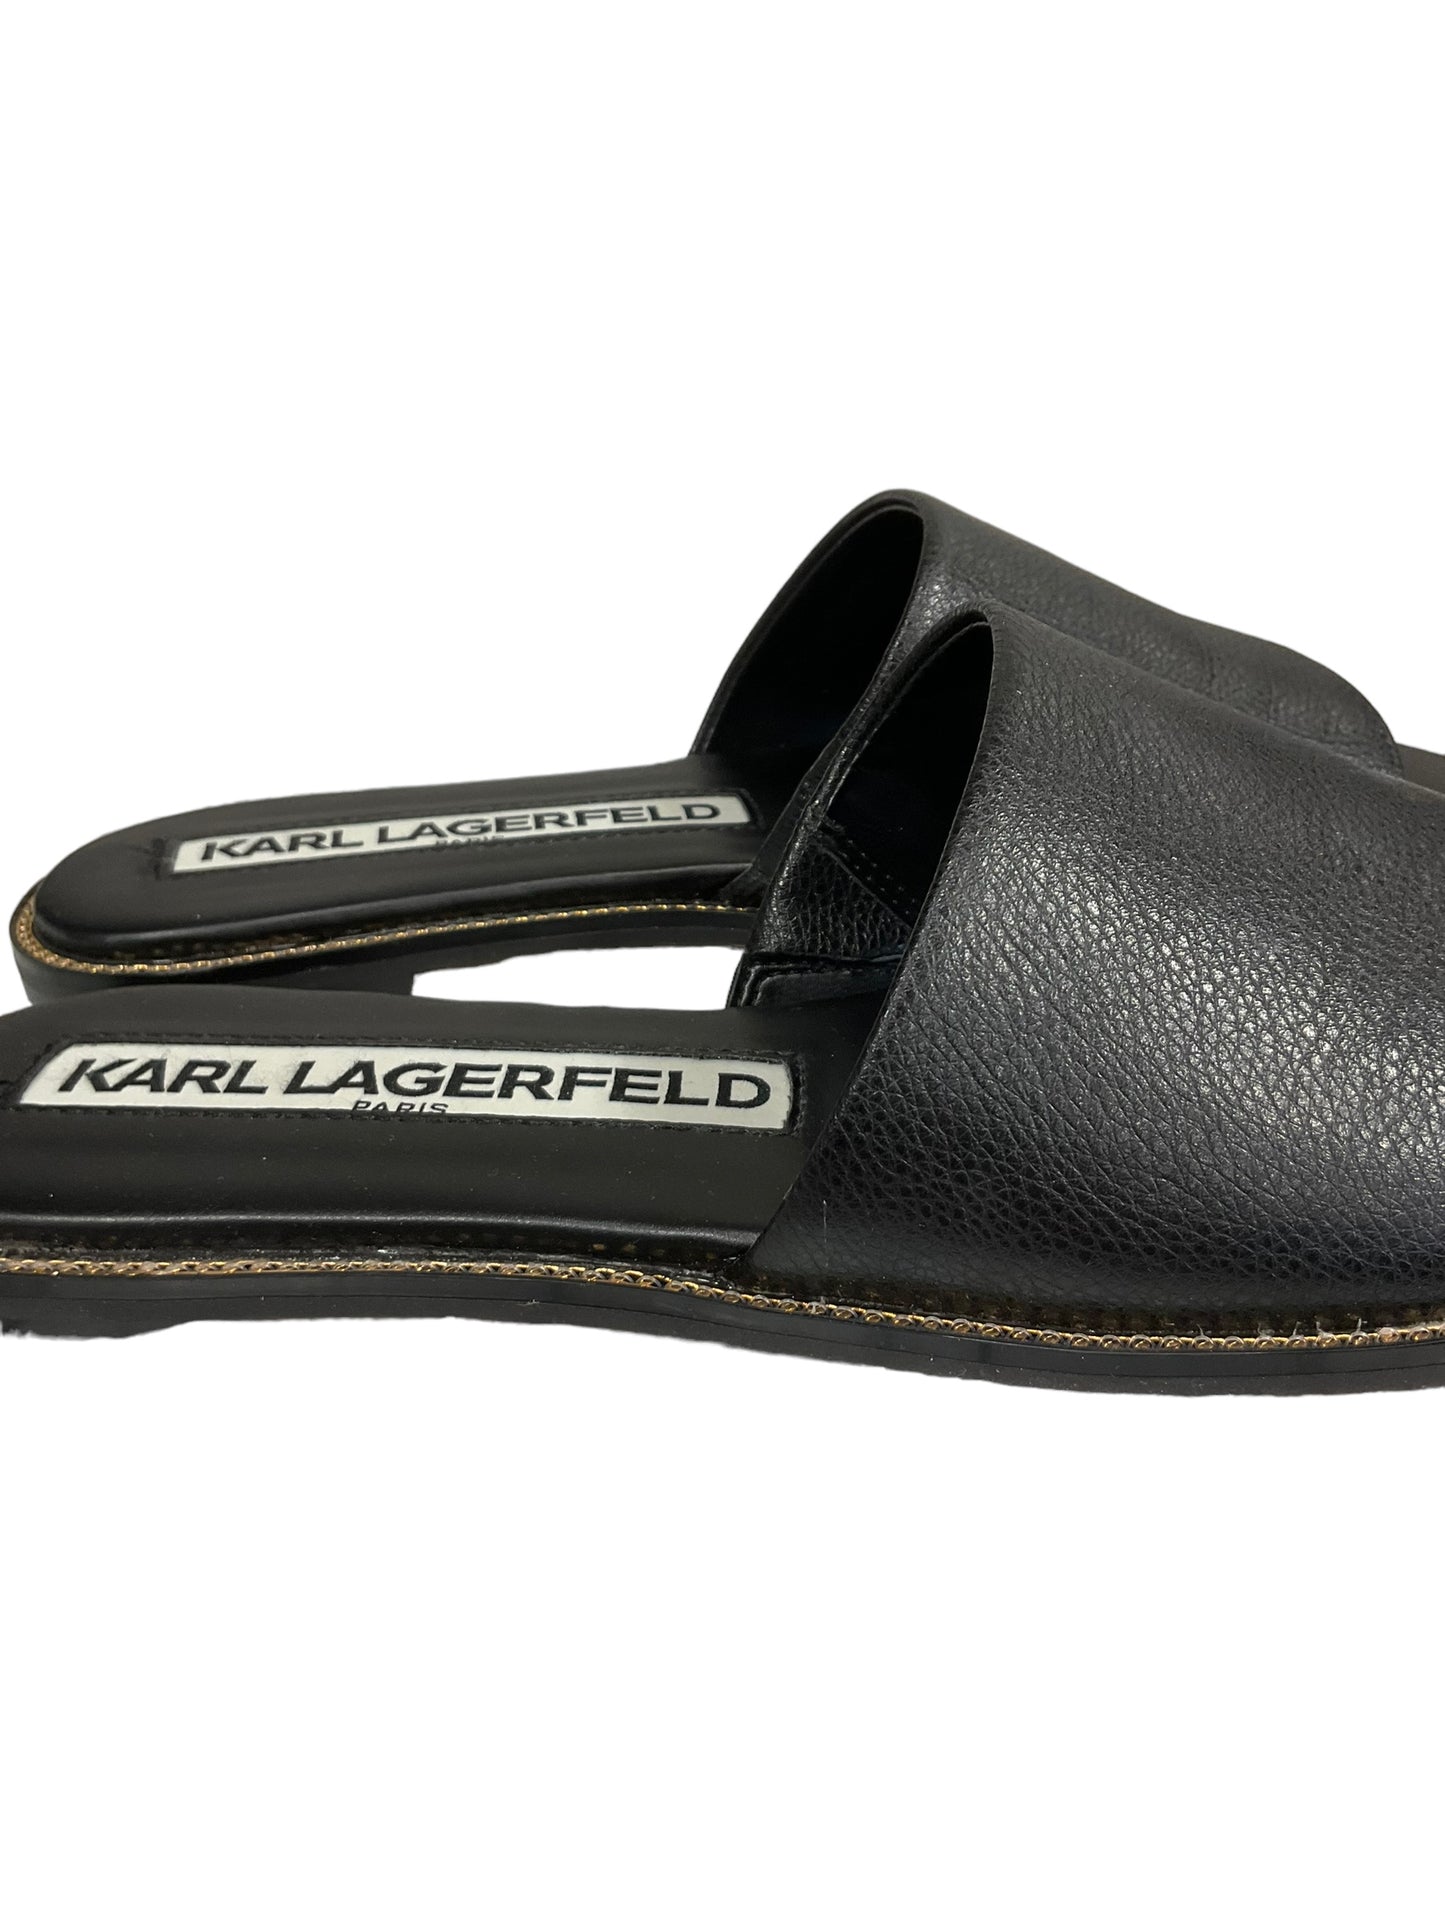 Sandals Flats By Karl Lagerfeld  Size: 8.5